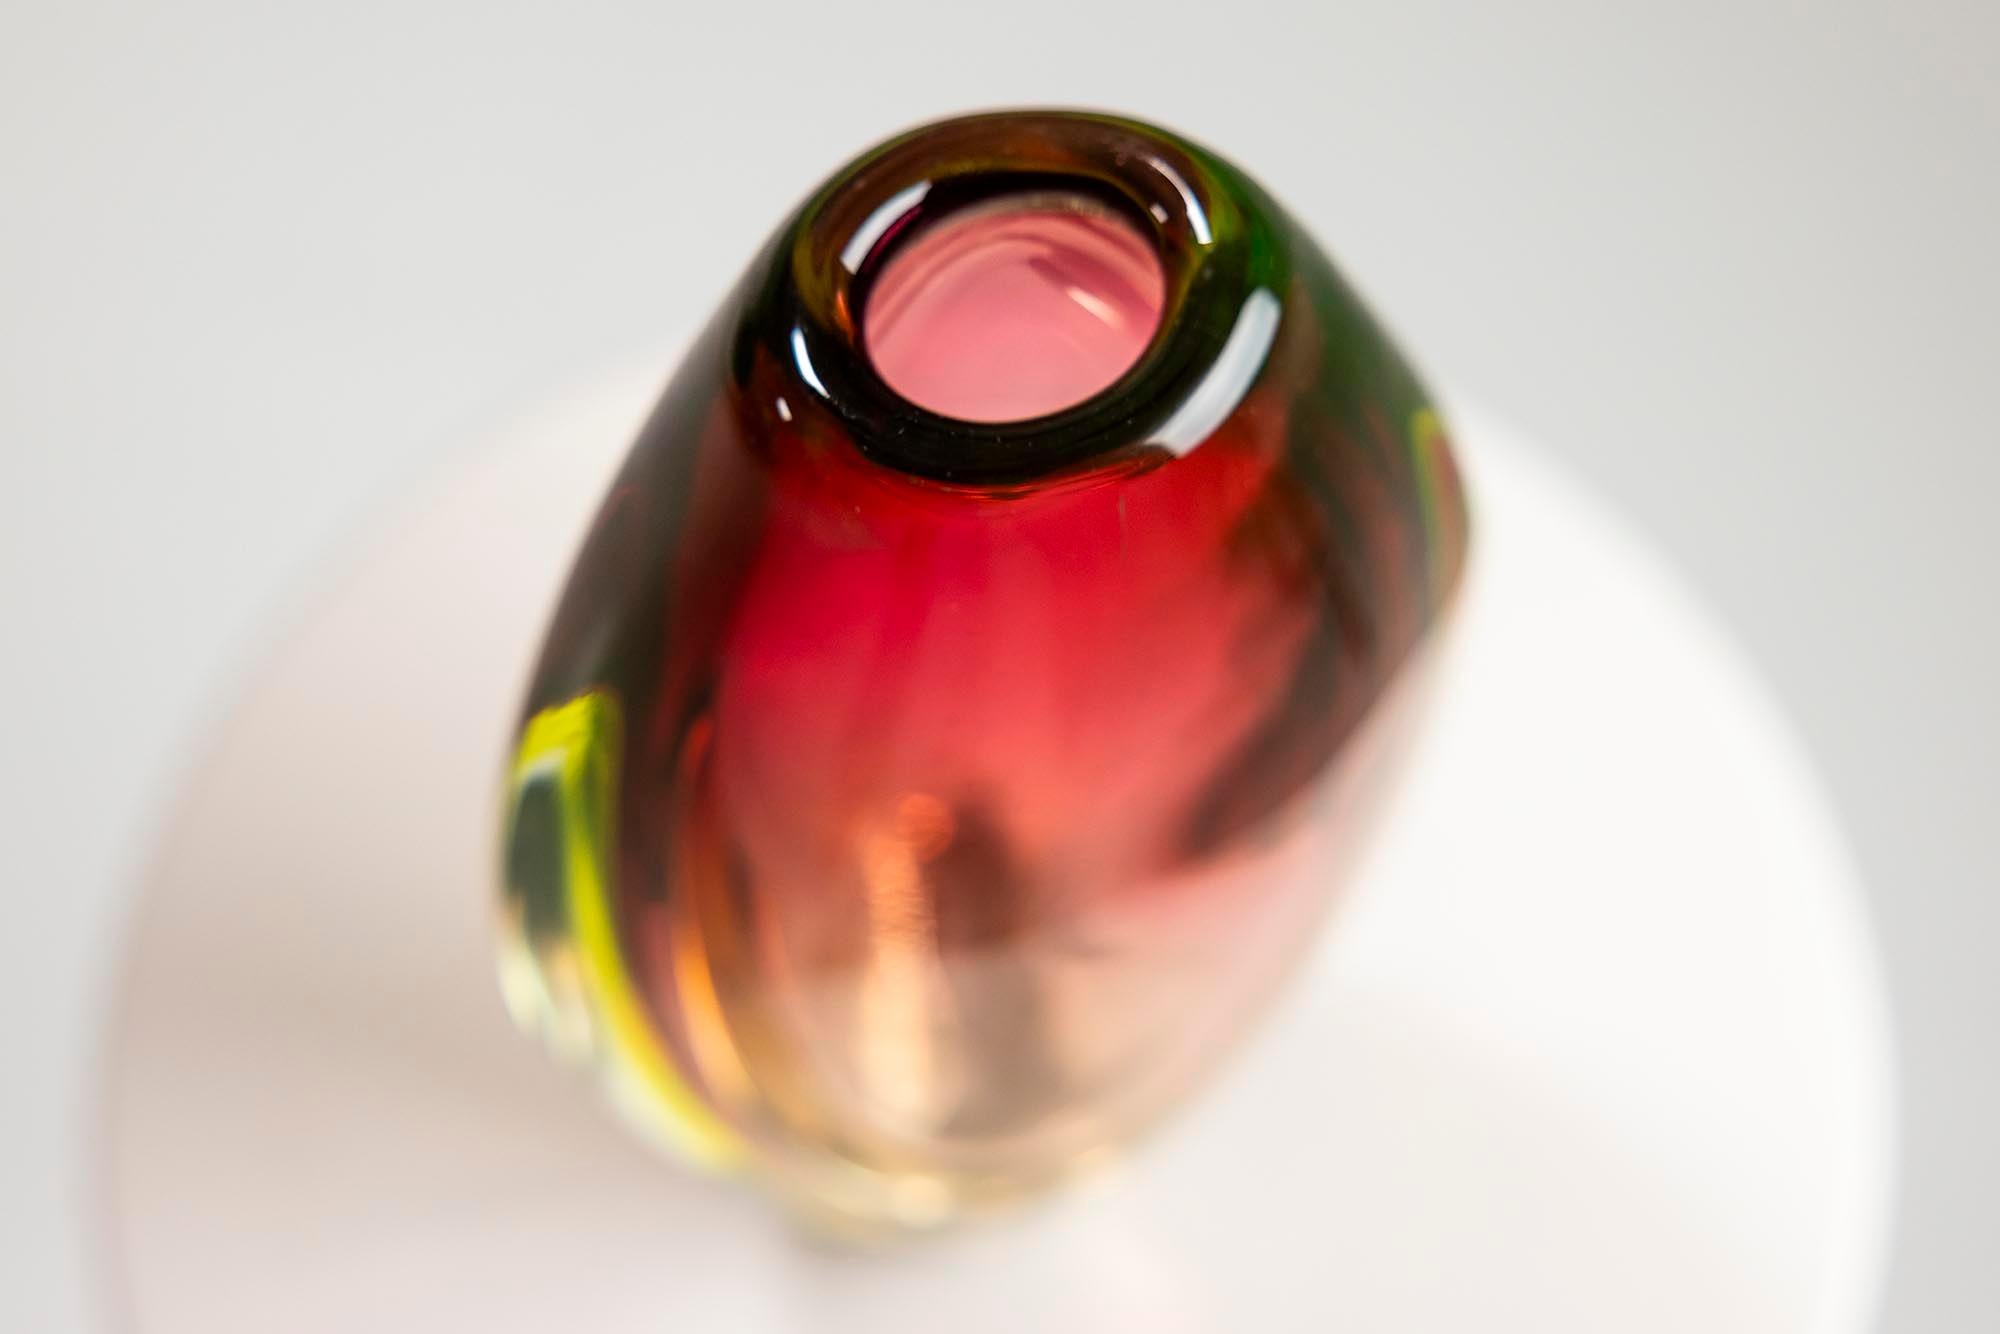 Mid-Century Modern Red and Yellow Murano Sommerso Vase by Flavio Poli for Seguso Vetri d'Arte